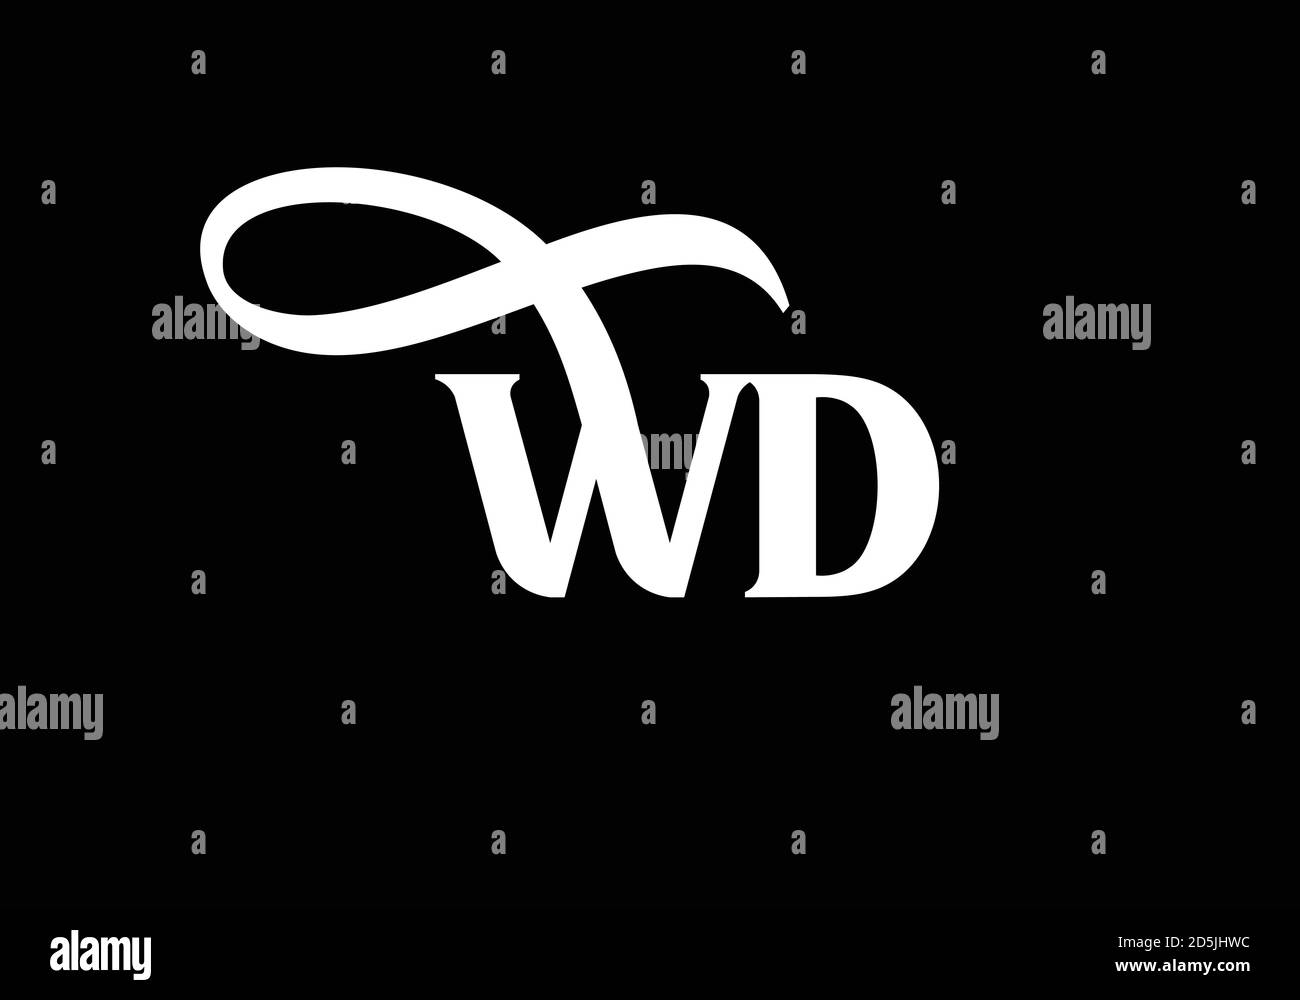 Initial Monogram Letter W D Logo Design Vector Template. Graphic Alphabet Symbol for Corporate Business Identity Stock Vector